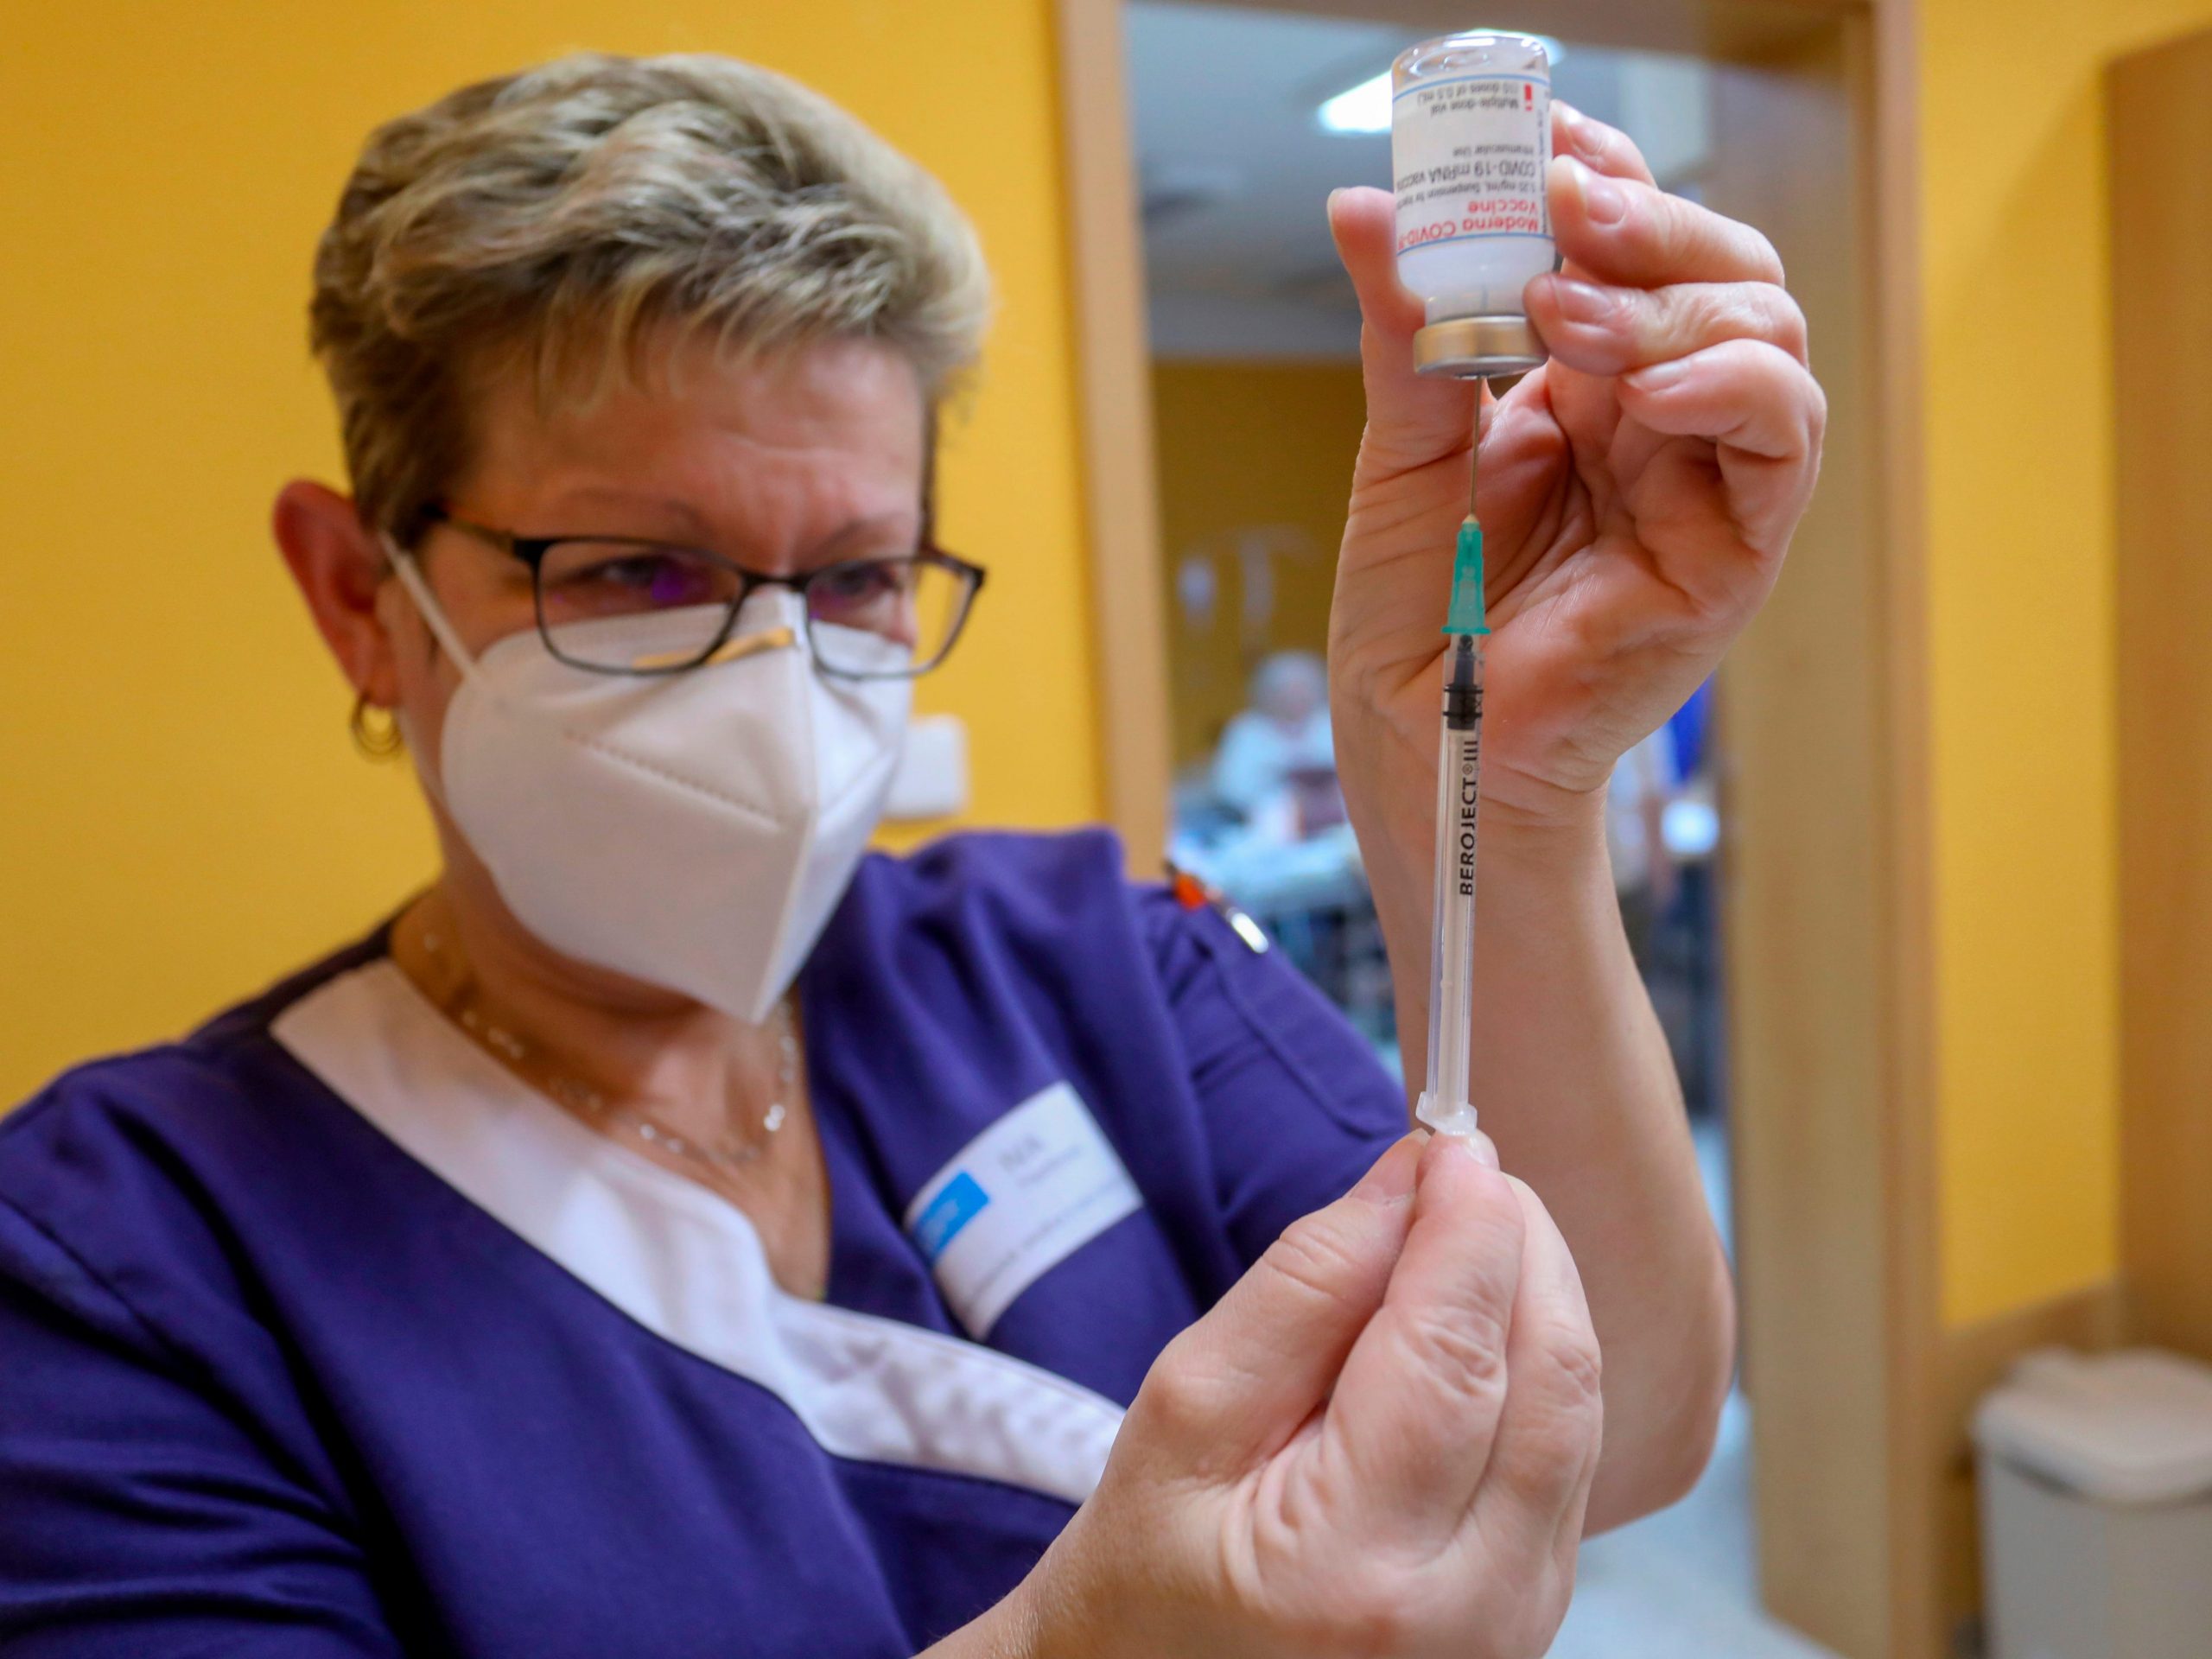 A healthcare professional wearing a mask fills a syringe of the Moderna COVID-19 vaccine from a glass vial.